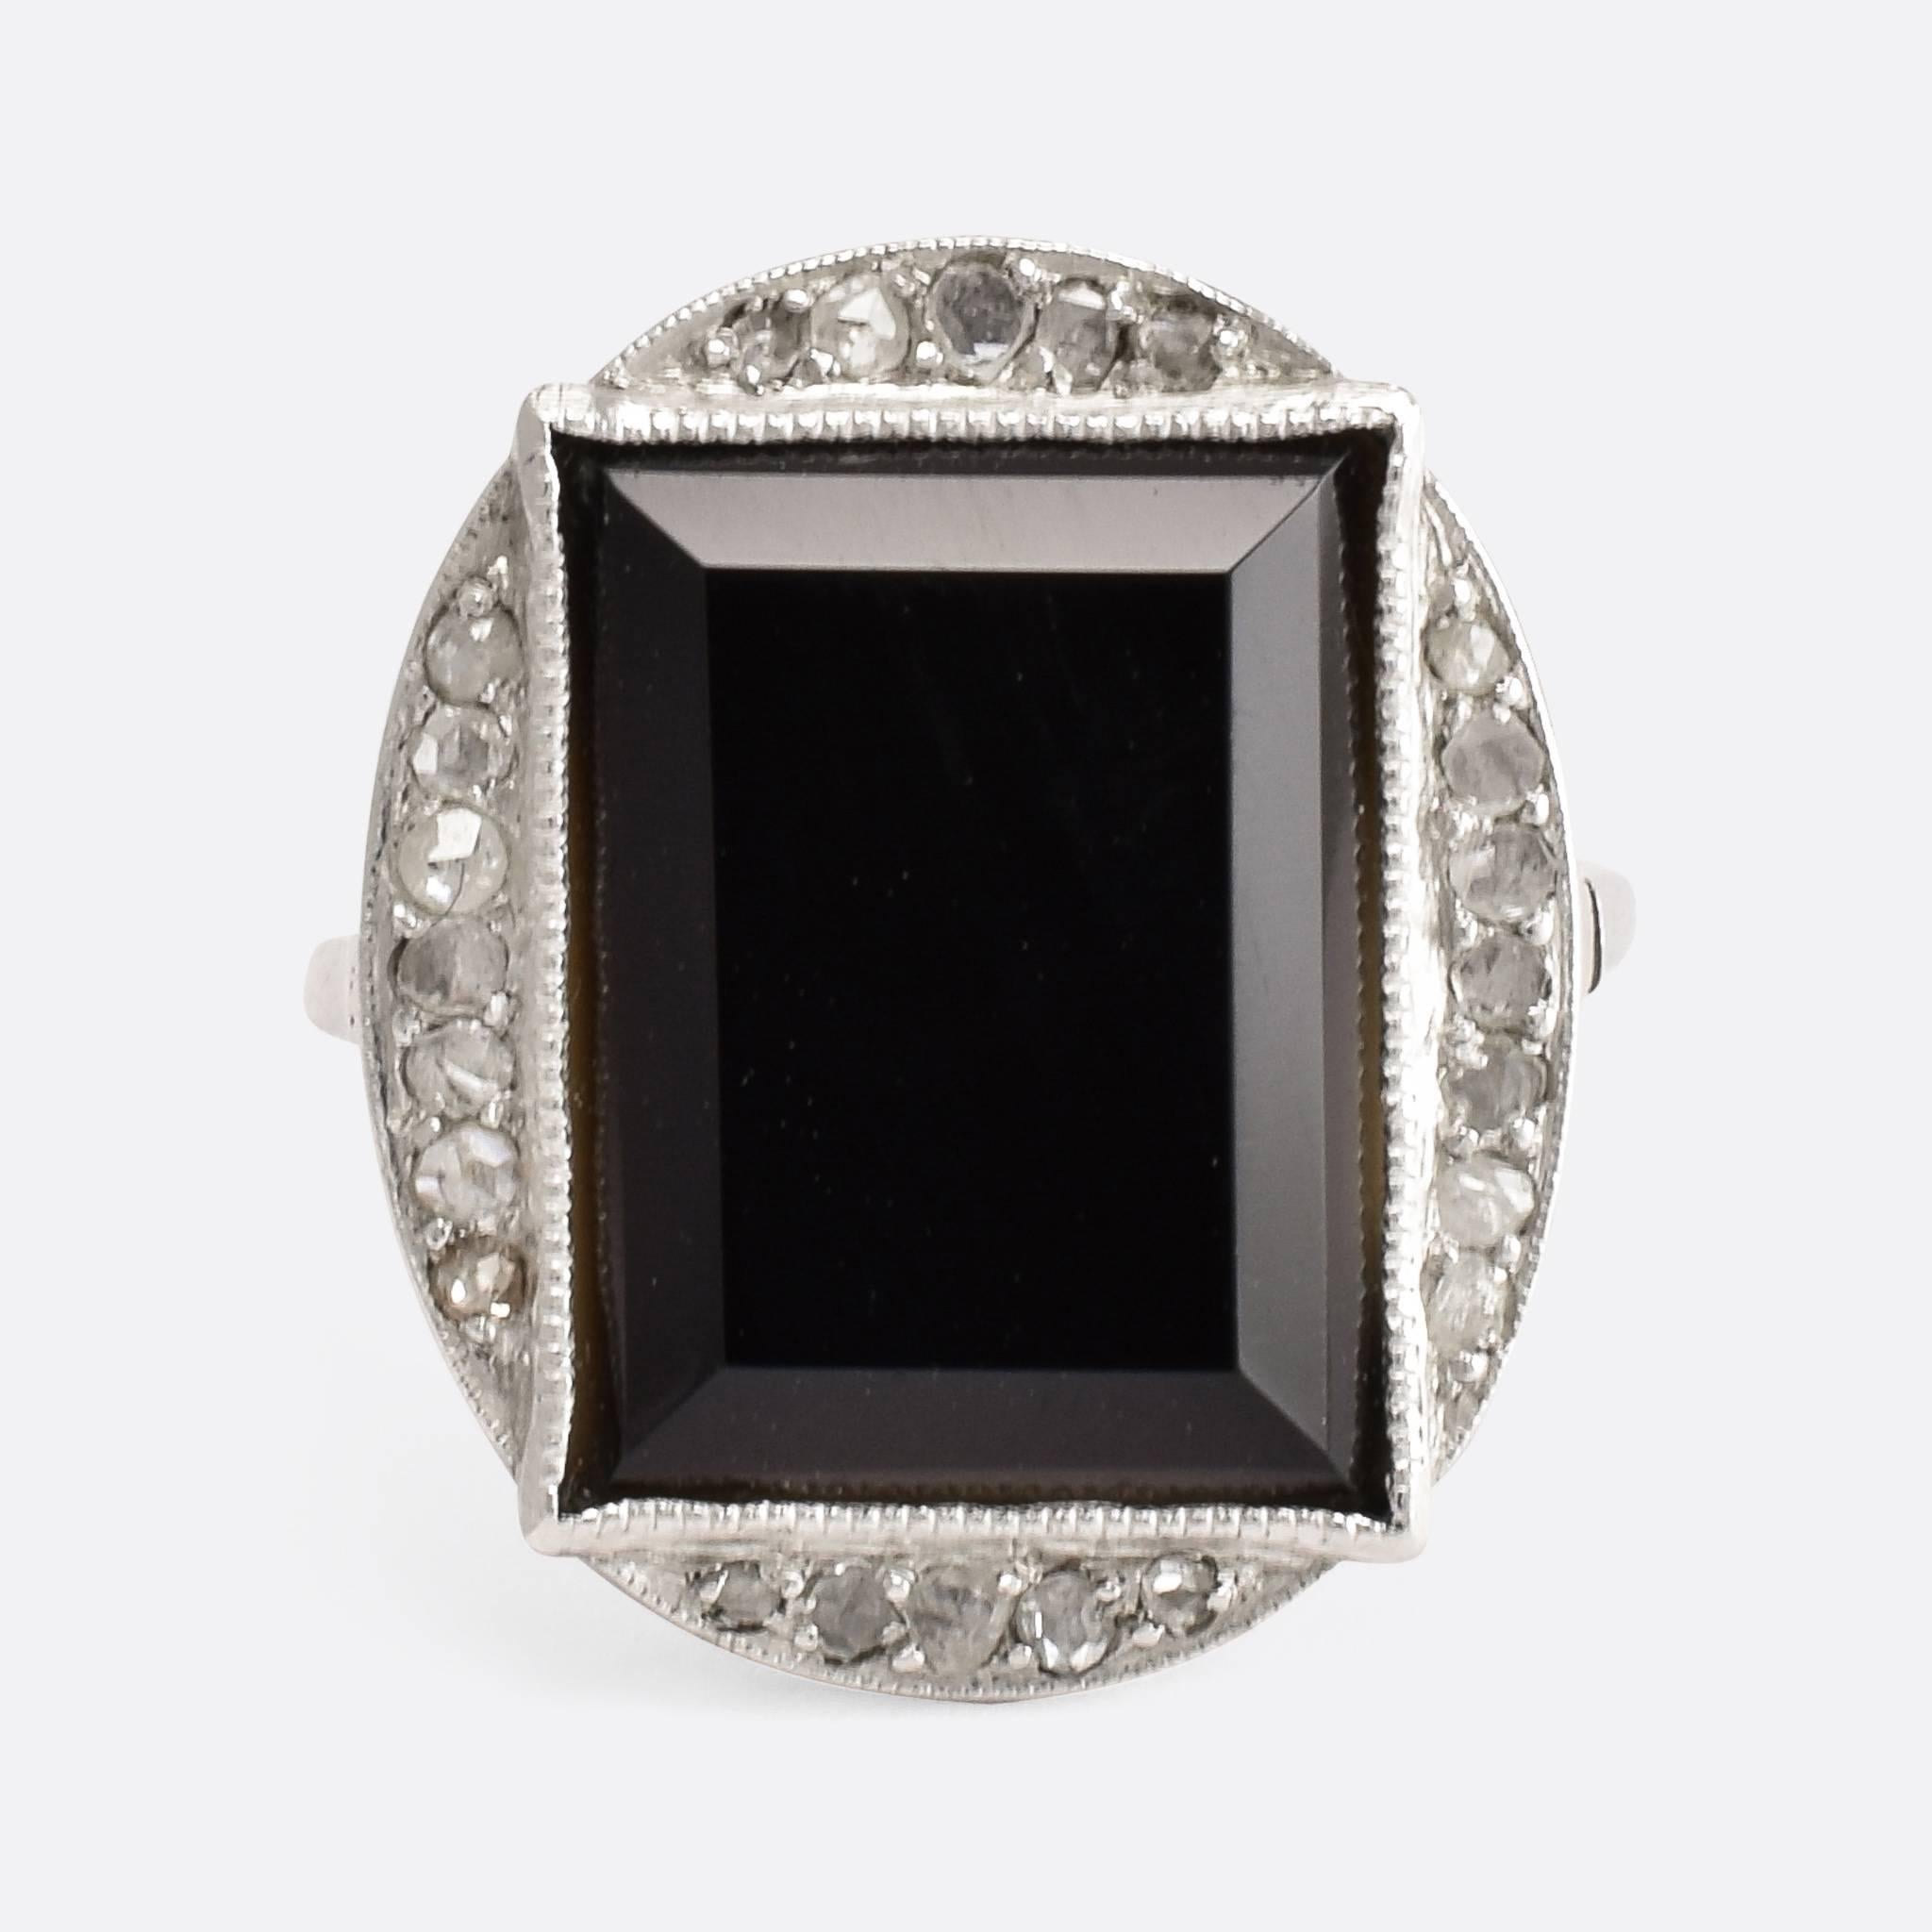 This fantastic Art Deco ring has an oversized head, set with a large slab of black onyx and rose cut diamonds. The platinum settings feature fine millegrain detail with a pretty galleried underside. A spectacular, and highly unusual statement ring,